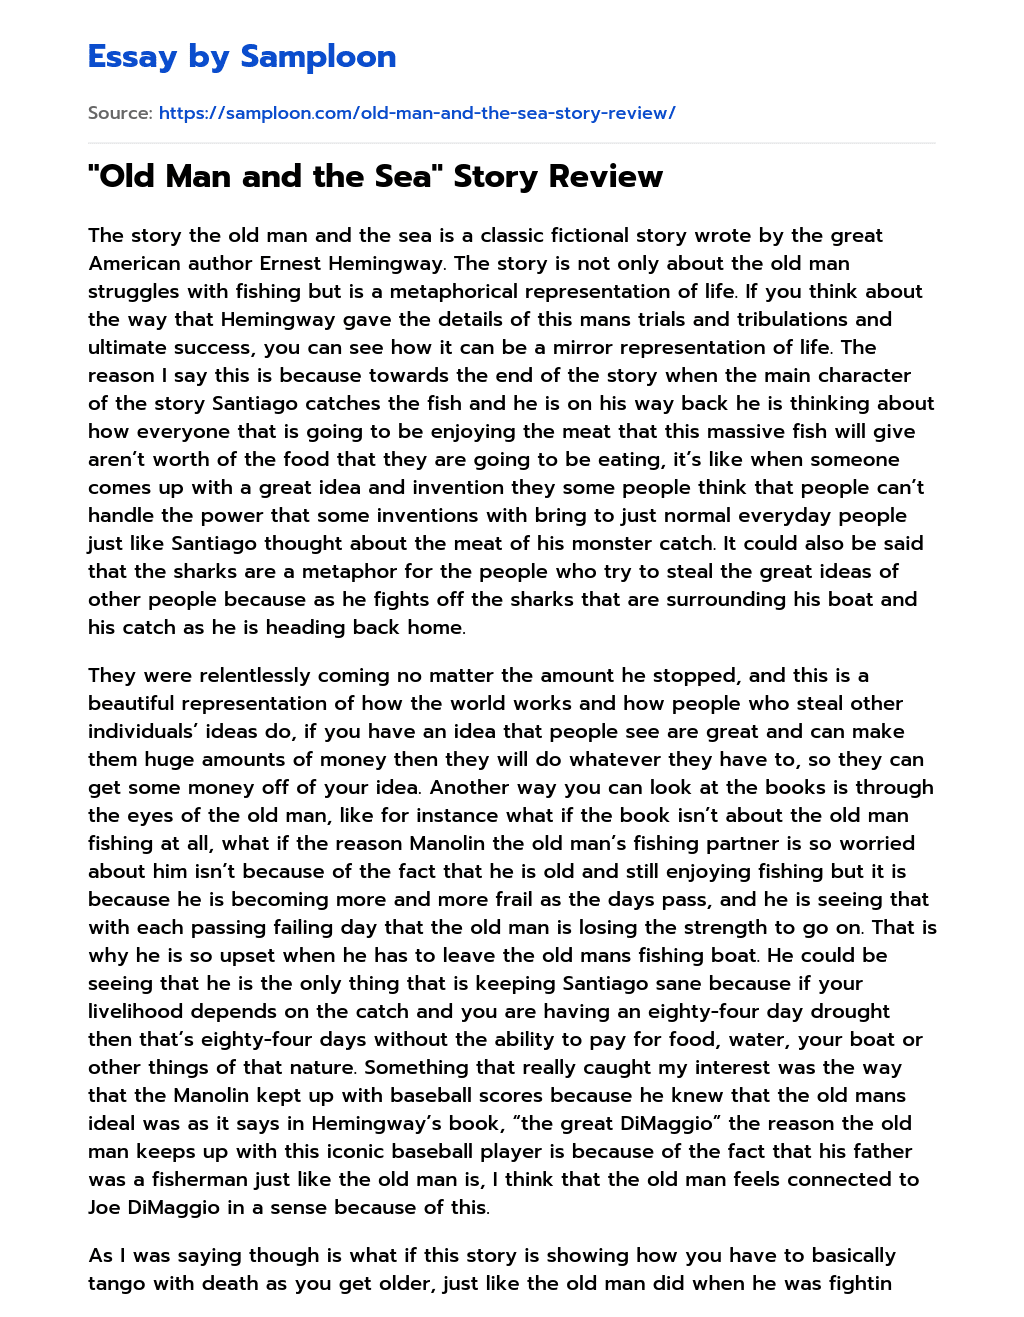 “Old Man and the Sea” Story Review essay